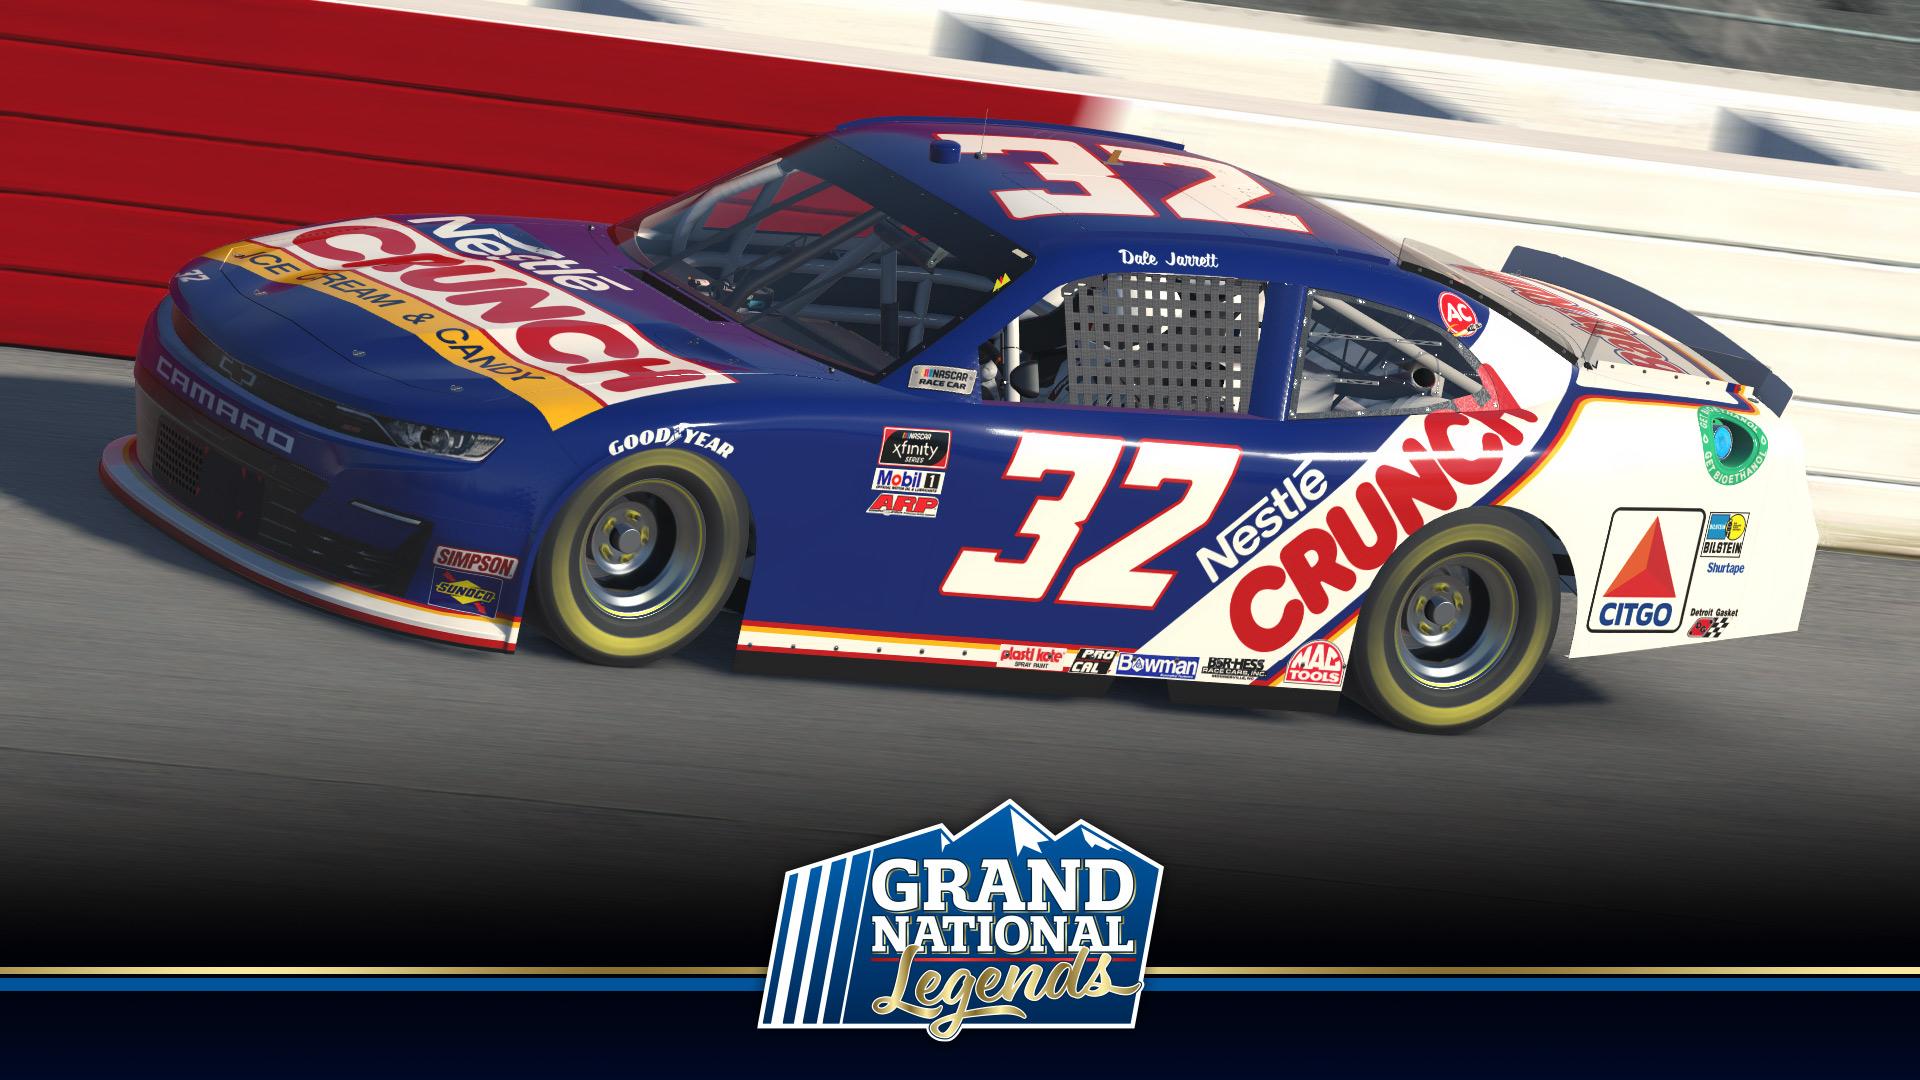 Preview of Dale Jarrett - 1991 - Nestle Crunch - Grand National Legends by Paul Newton